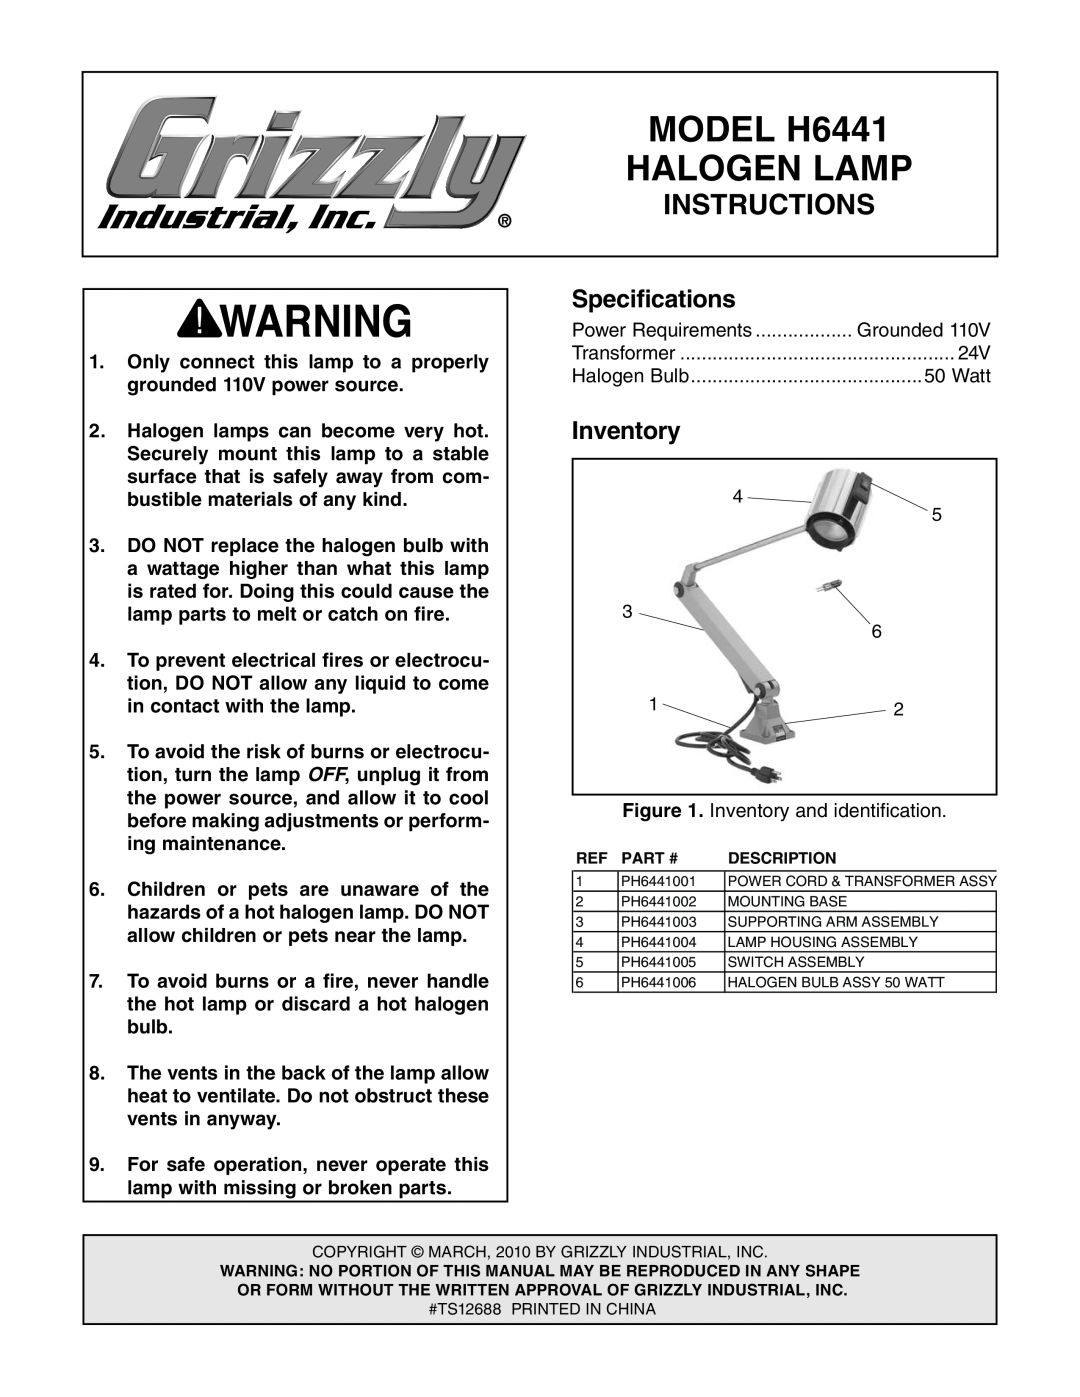 Grizzly specifications Specifications, Inventory, MODEL H6440/H6441, Halogen Lamp, Instructions 